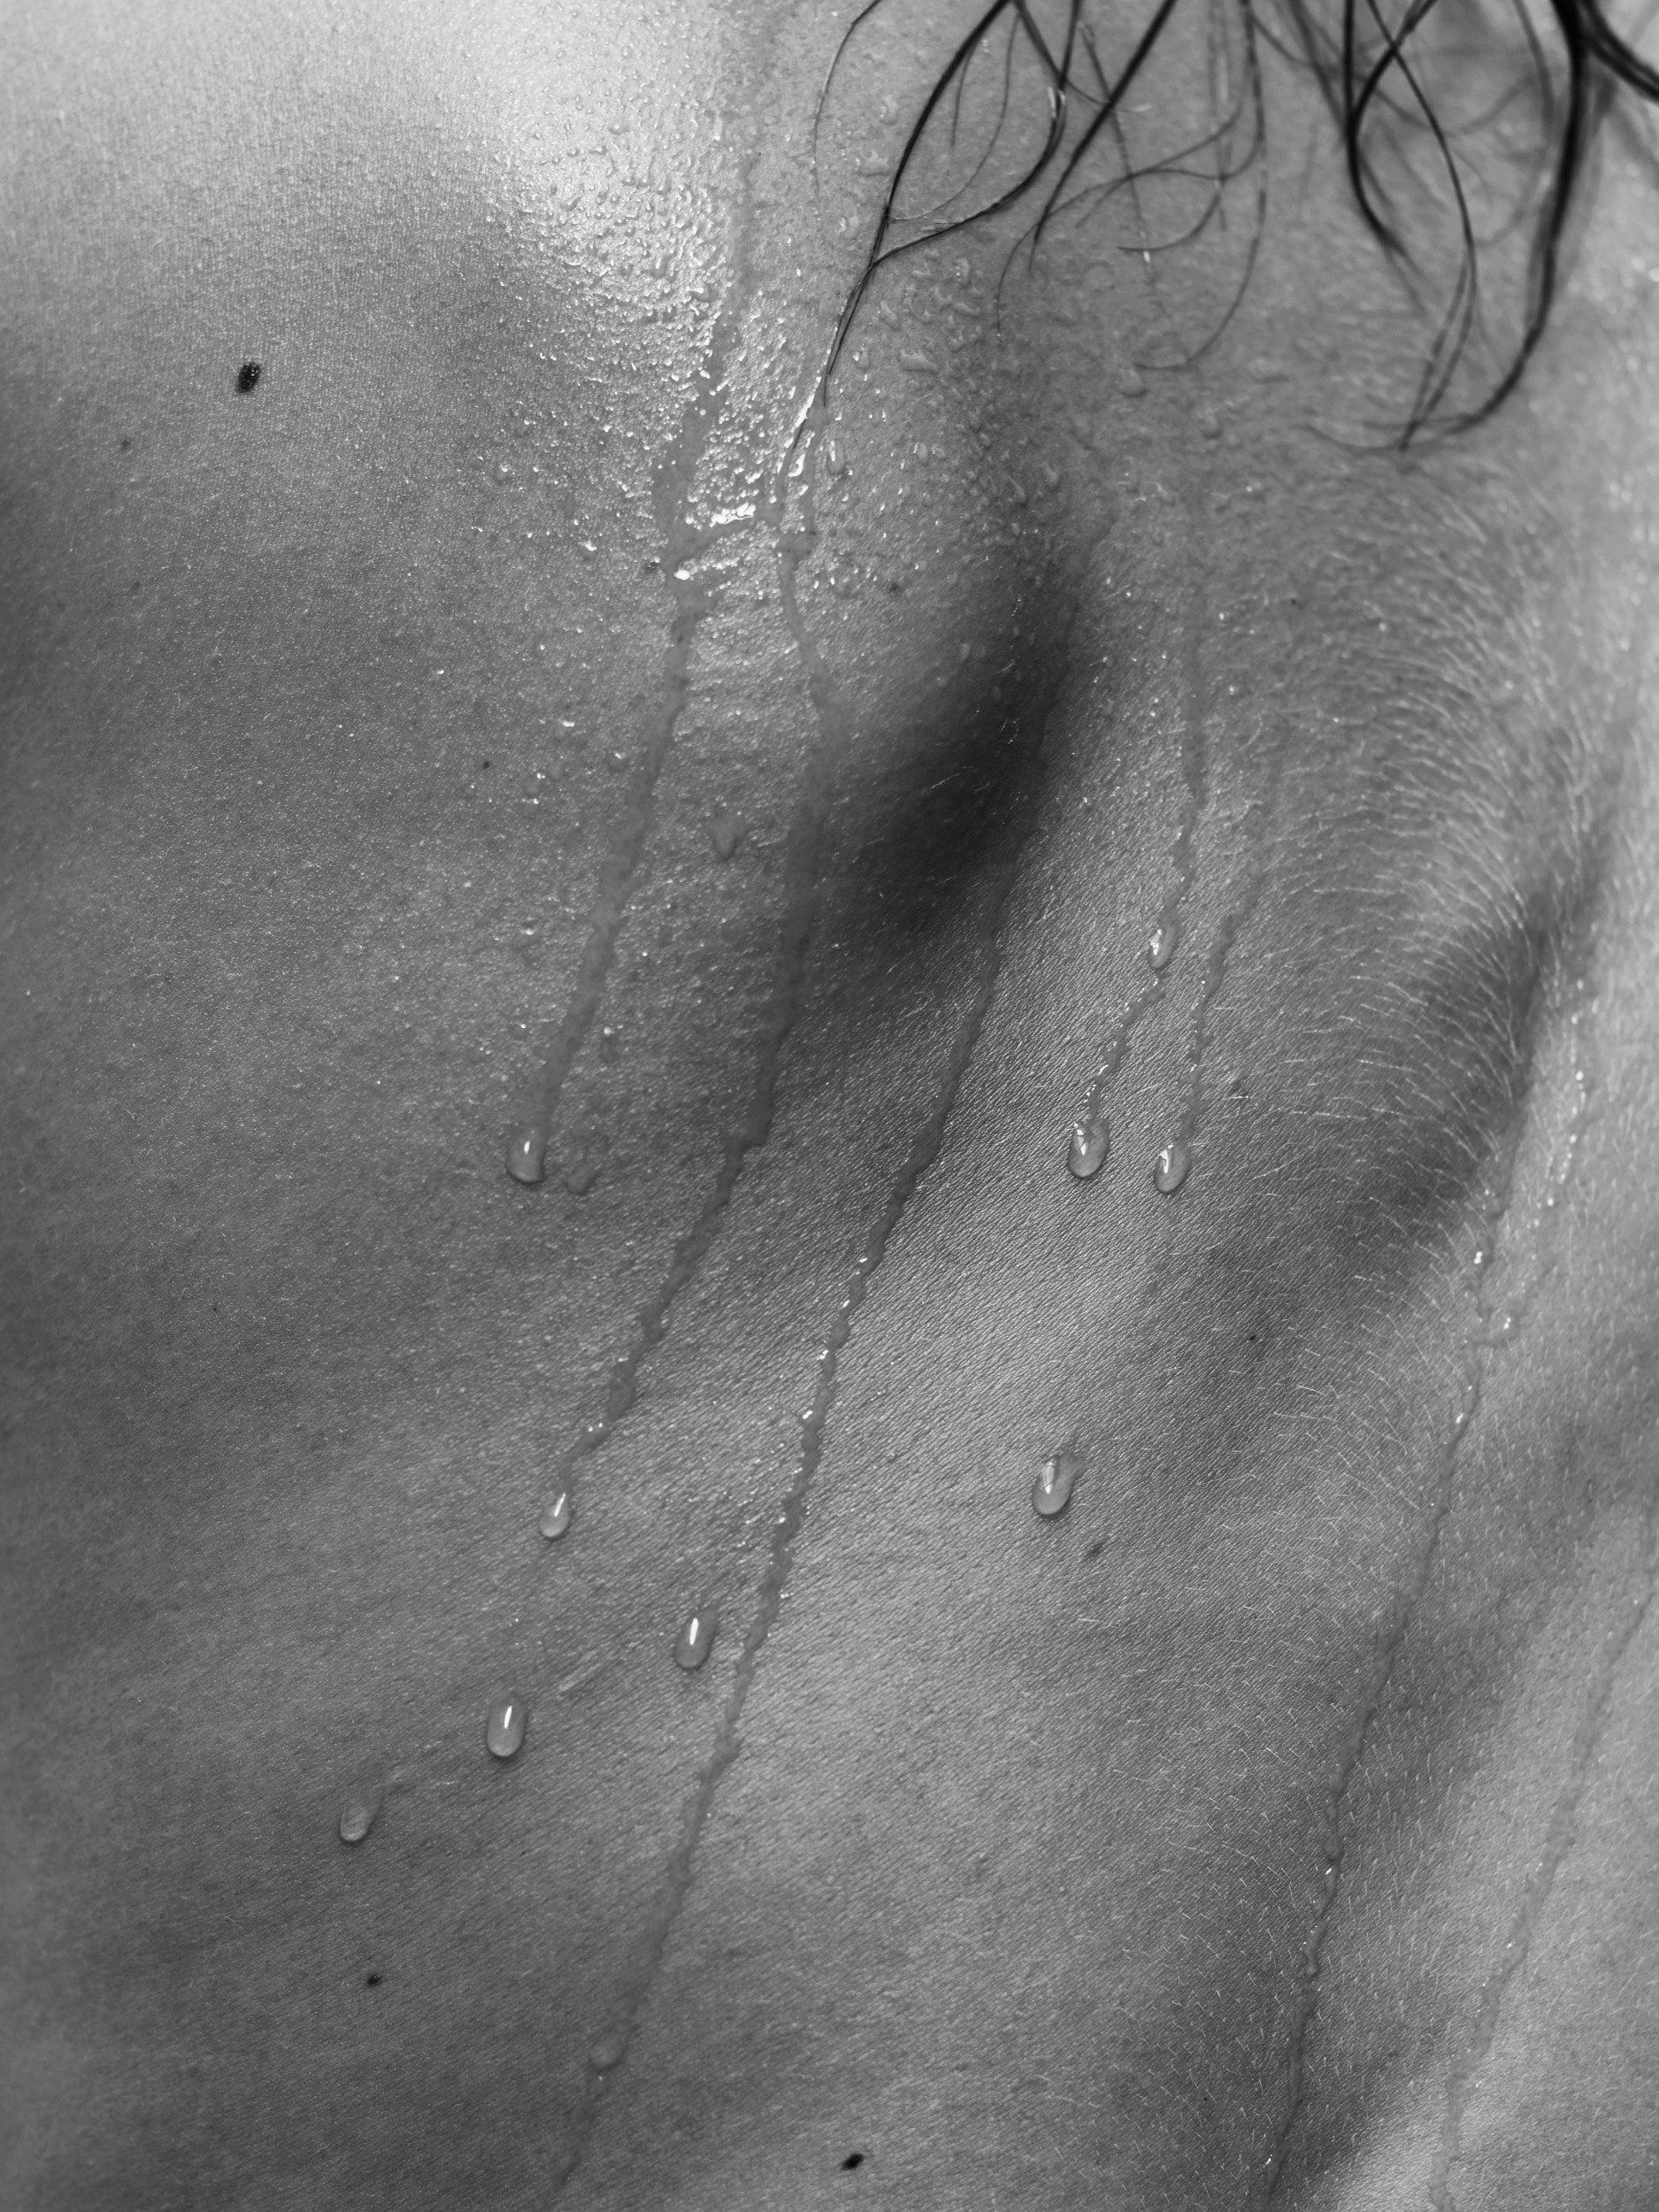 Gianluca Fontana's 'Drops' - Abstract monochrome photograph of wet drops on a bare back, strands of wet hair, and water droplets, part of the Krops collection, created in Paris, 2017.